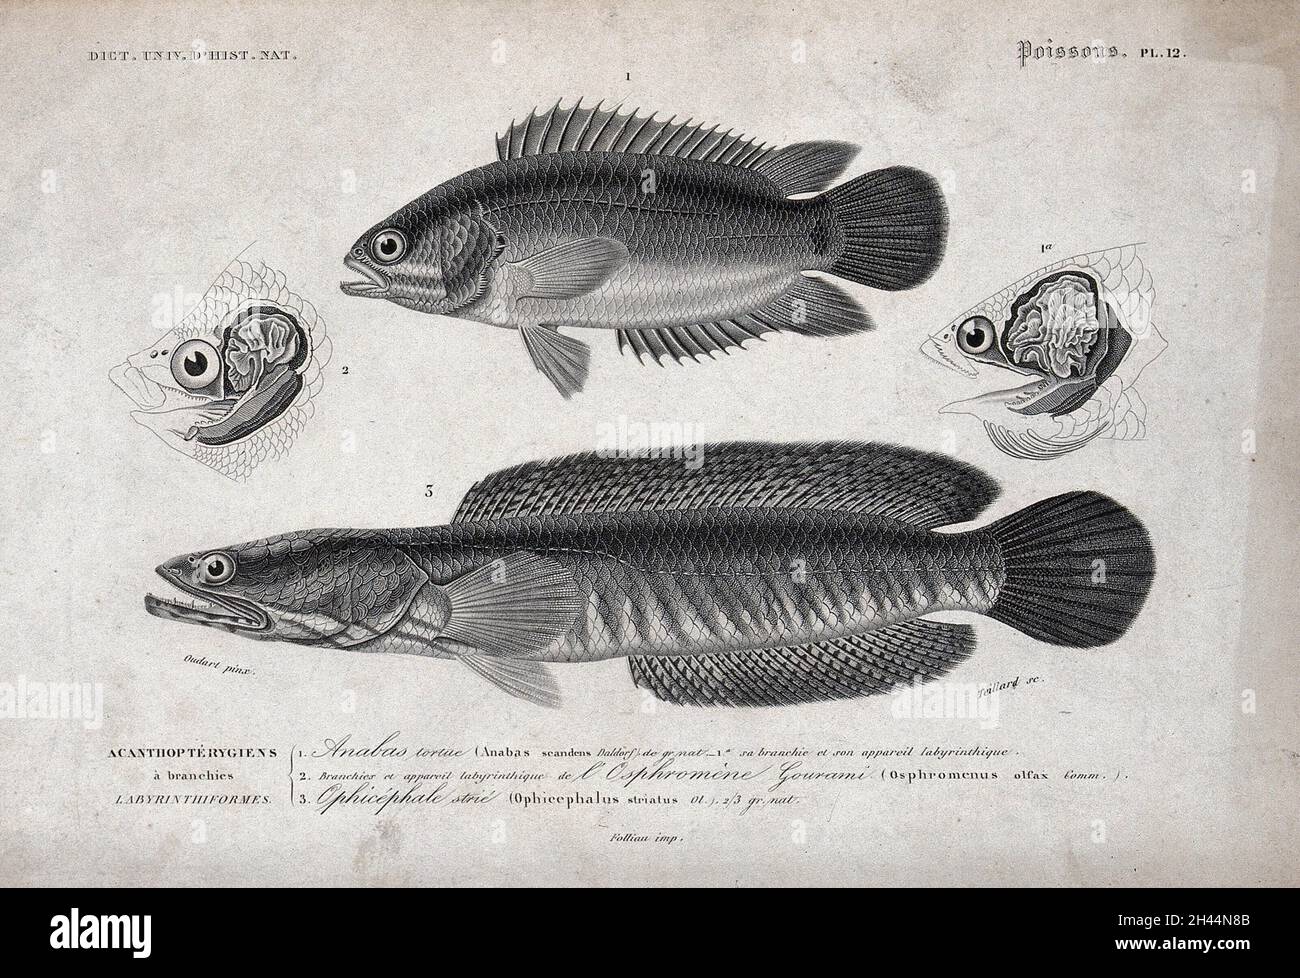 Above, an anabas seen from the side; middle, cross-sections of the heads and gills of two fishes; below, a ophicephalus seen from the side. Stipple engraving by Teillard after P.L. Oudart. Stock Photo